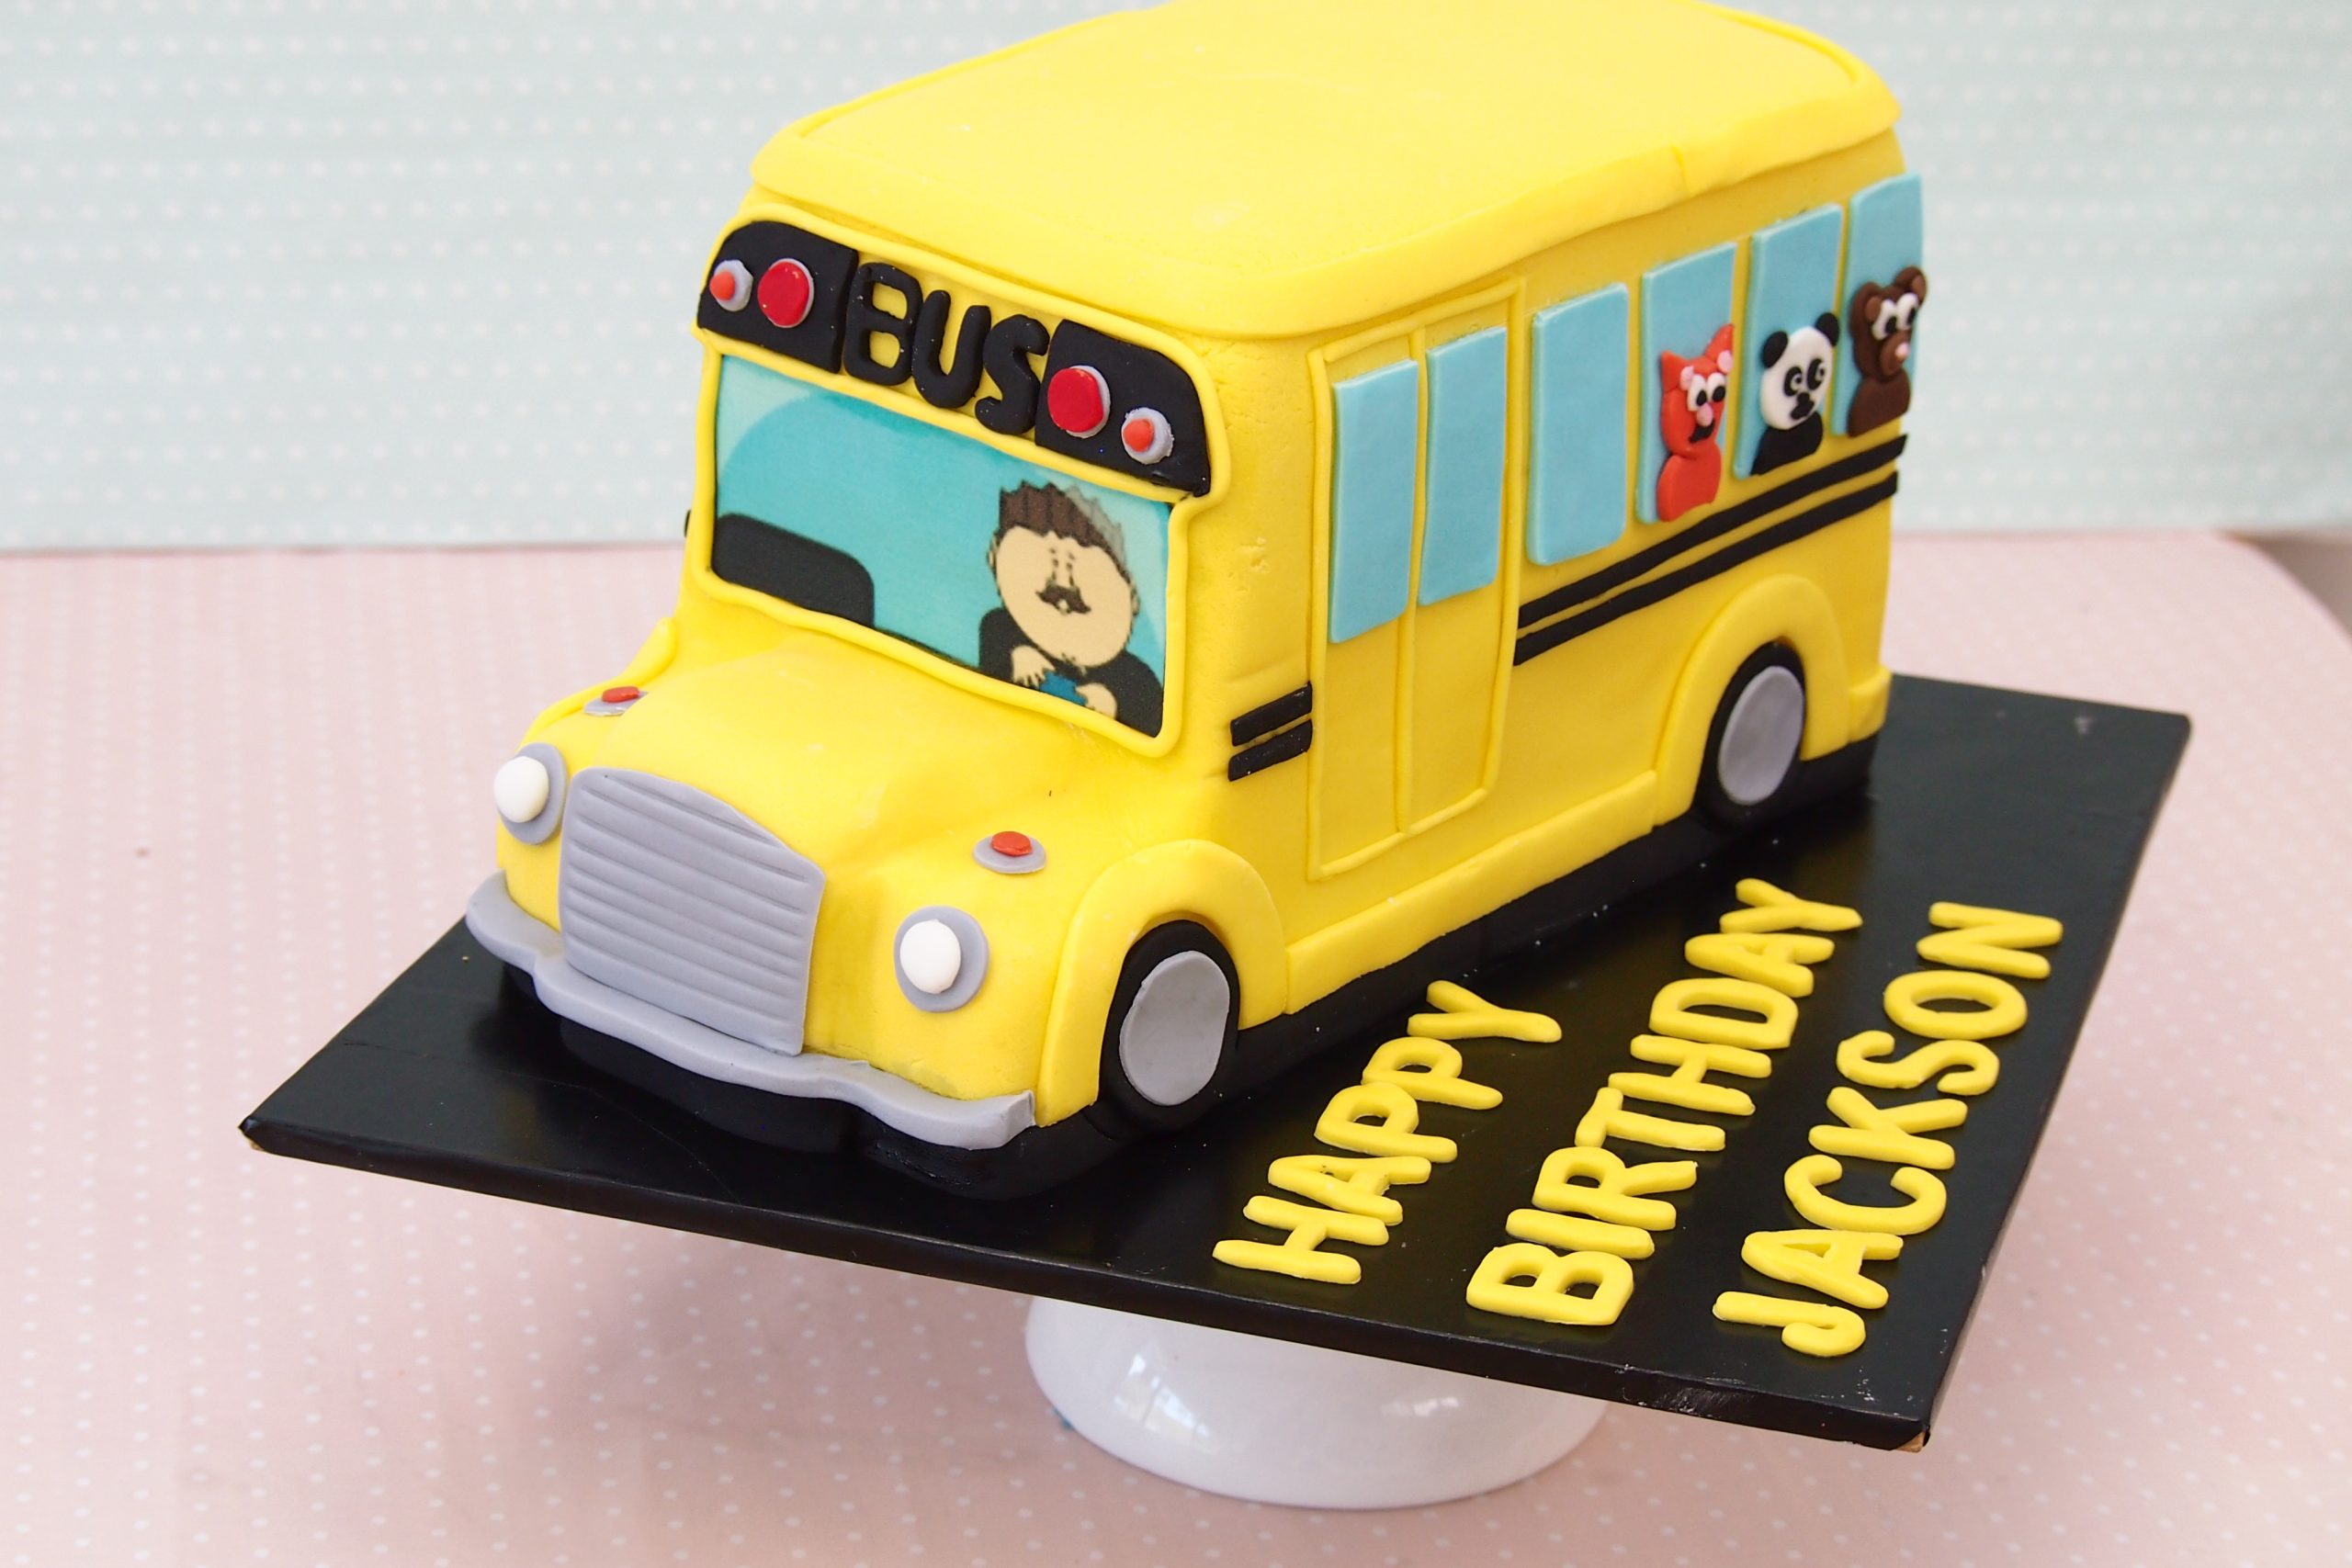 Buy Cocomelon Bus Cake Online for your Little One | CreamOne